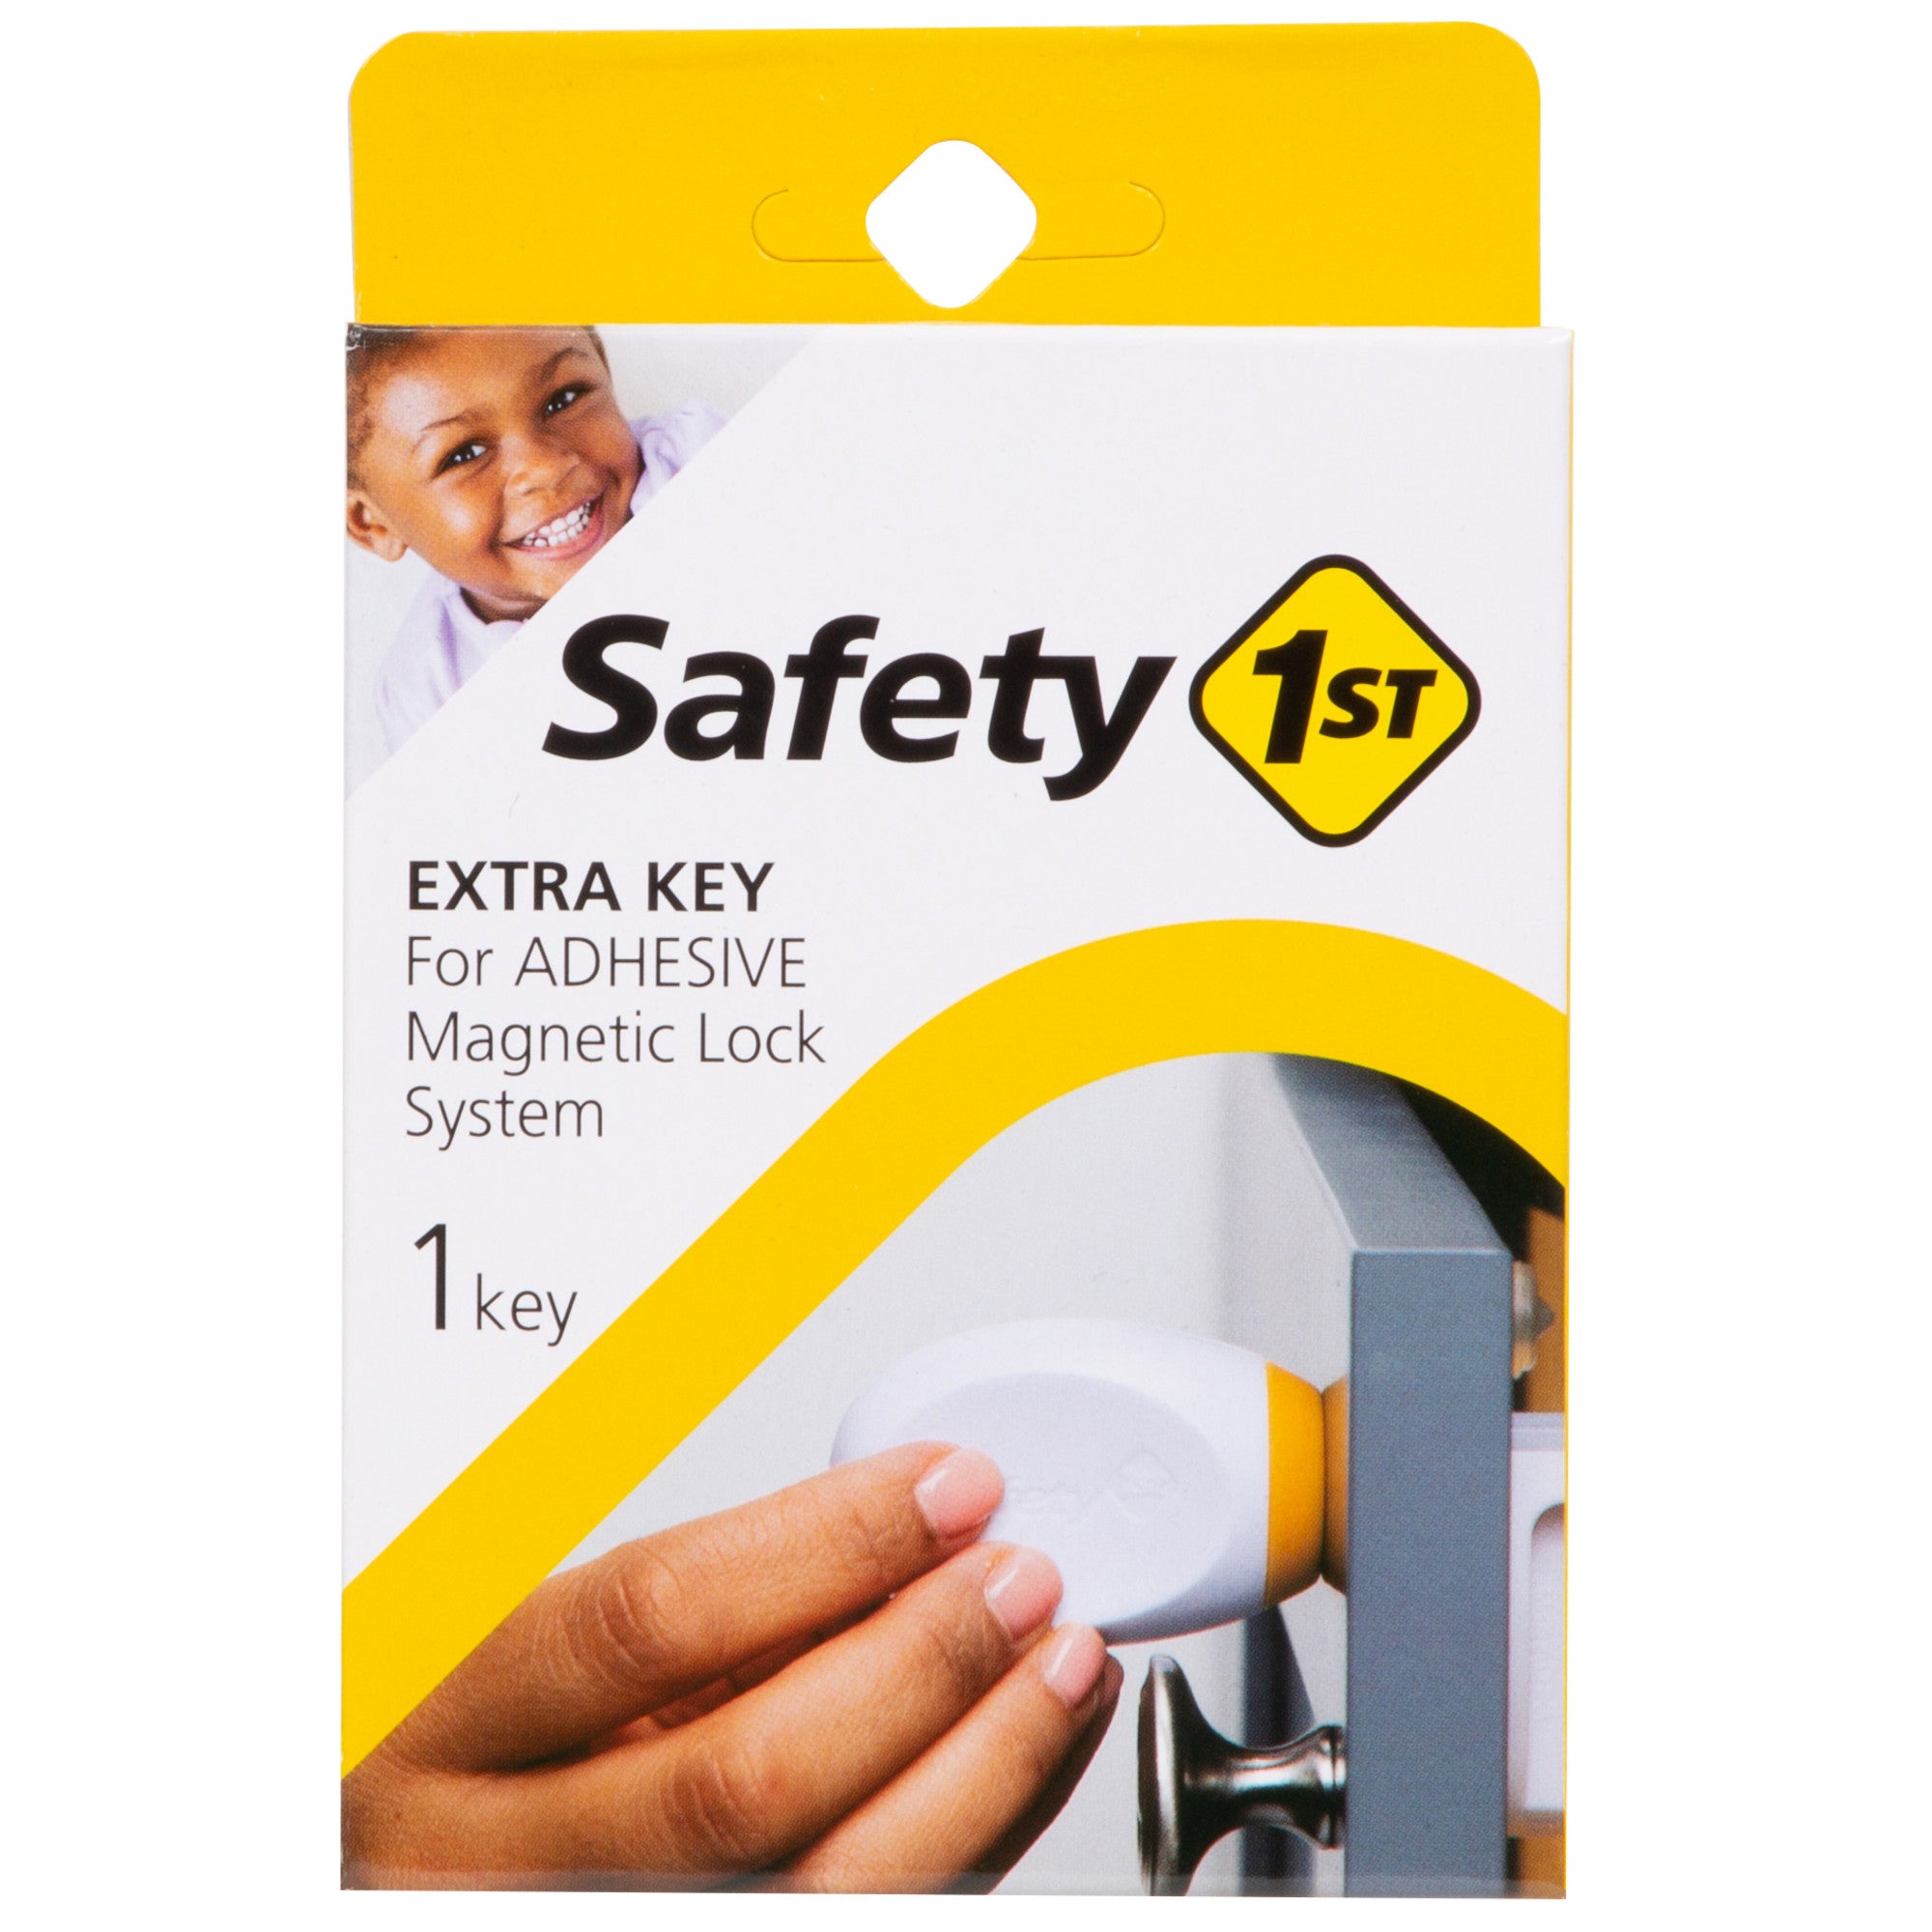 Extra Key for Adhesive Magnetic Lock System - White